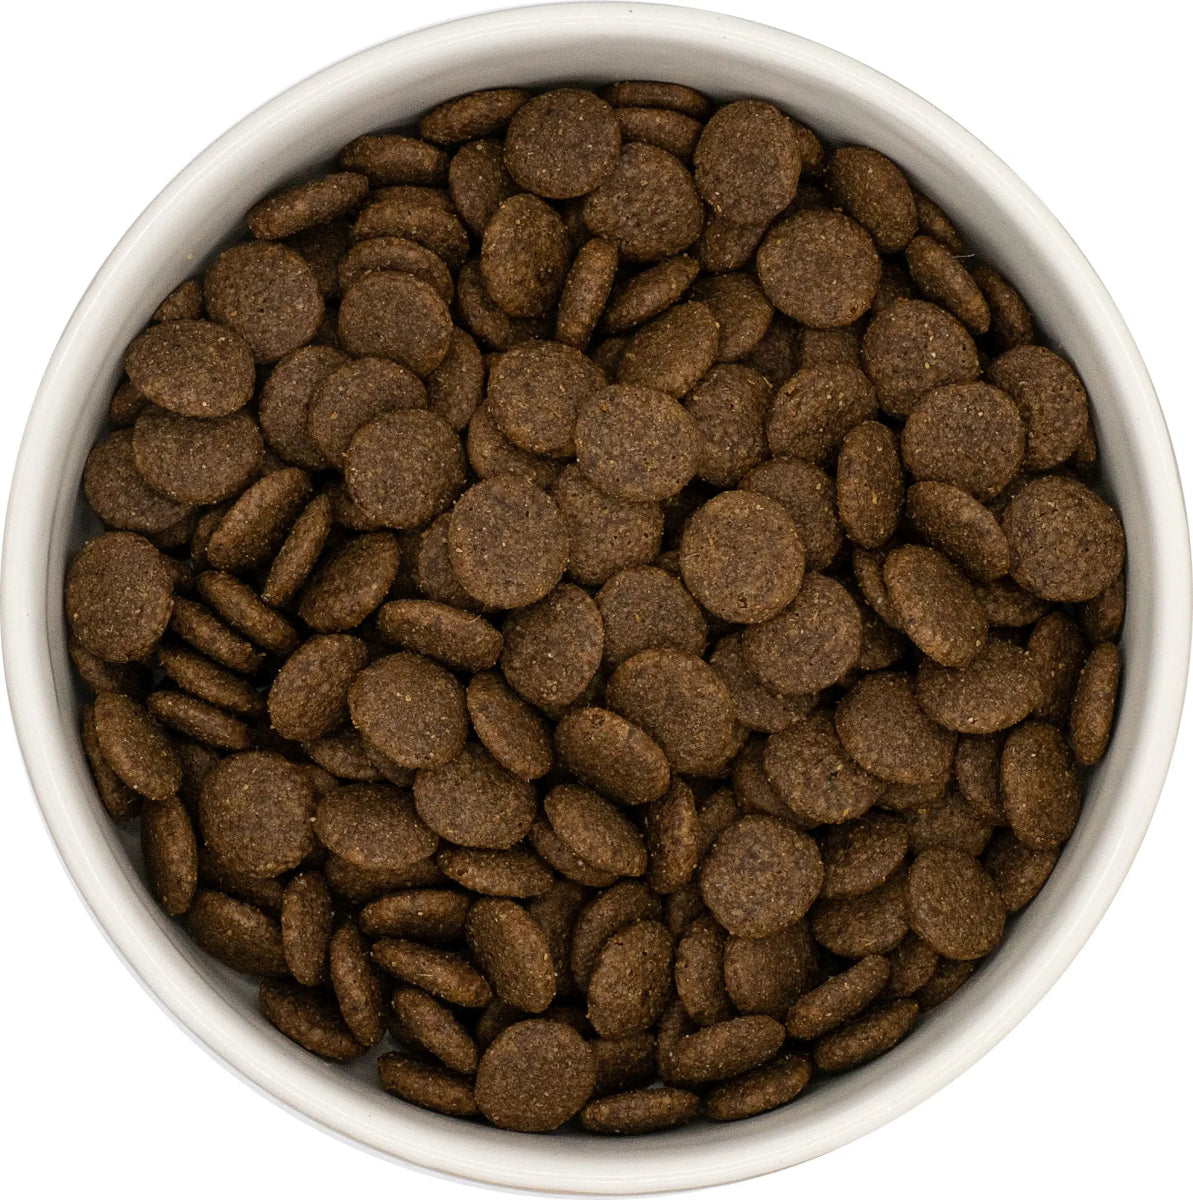 Grain Free Adult Dog Food - Angus Beef With Sweet Potato & Carrot - Kibble UK - My Online Pet Store